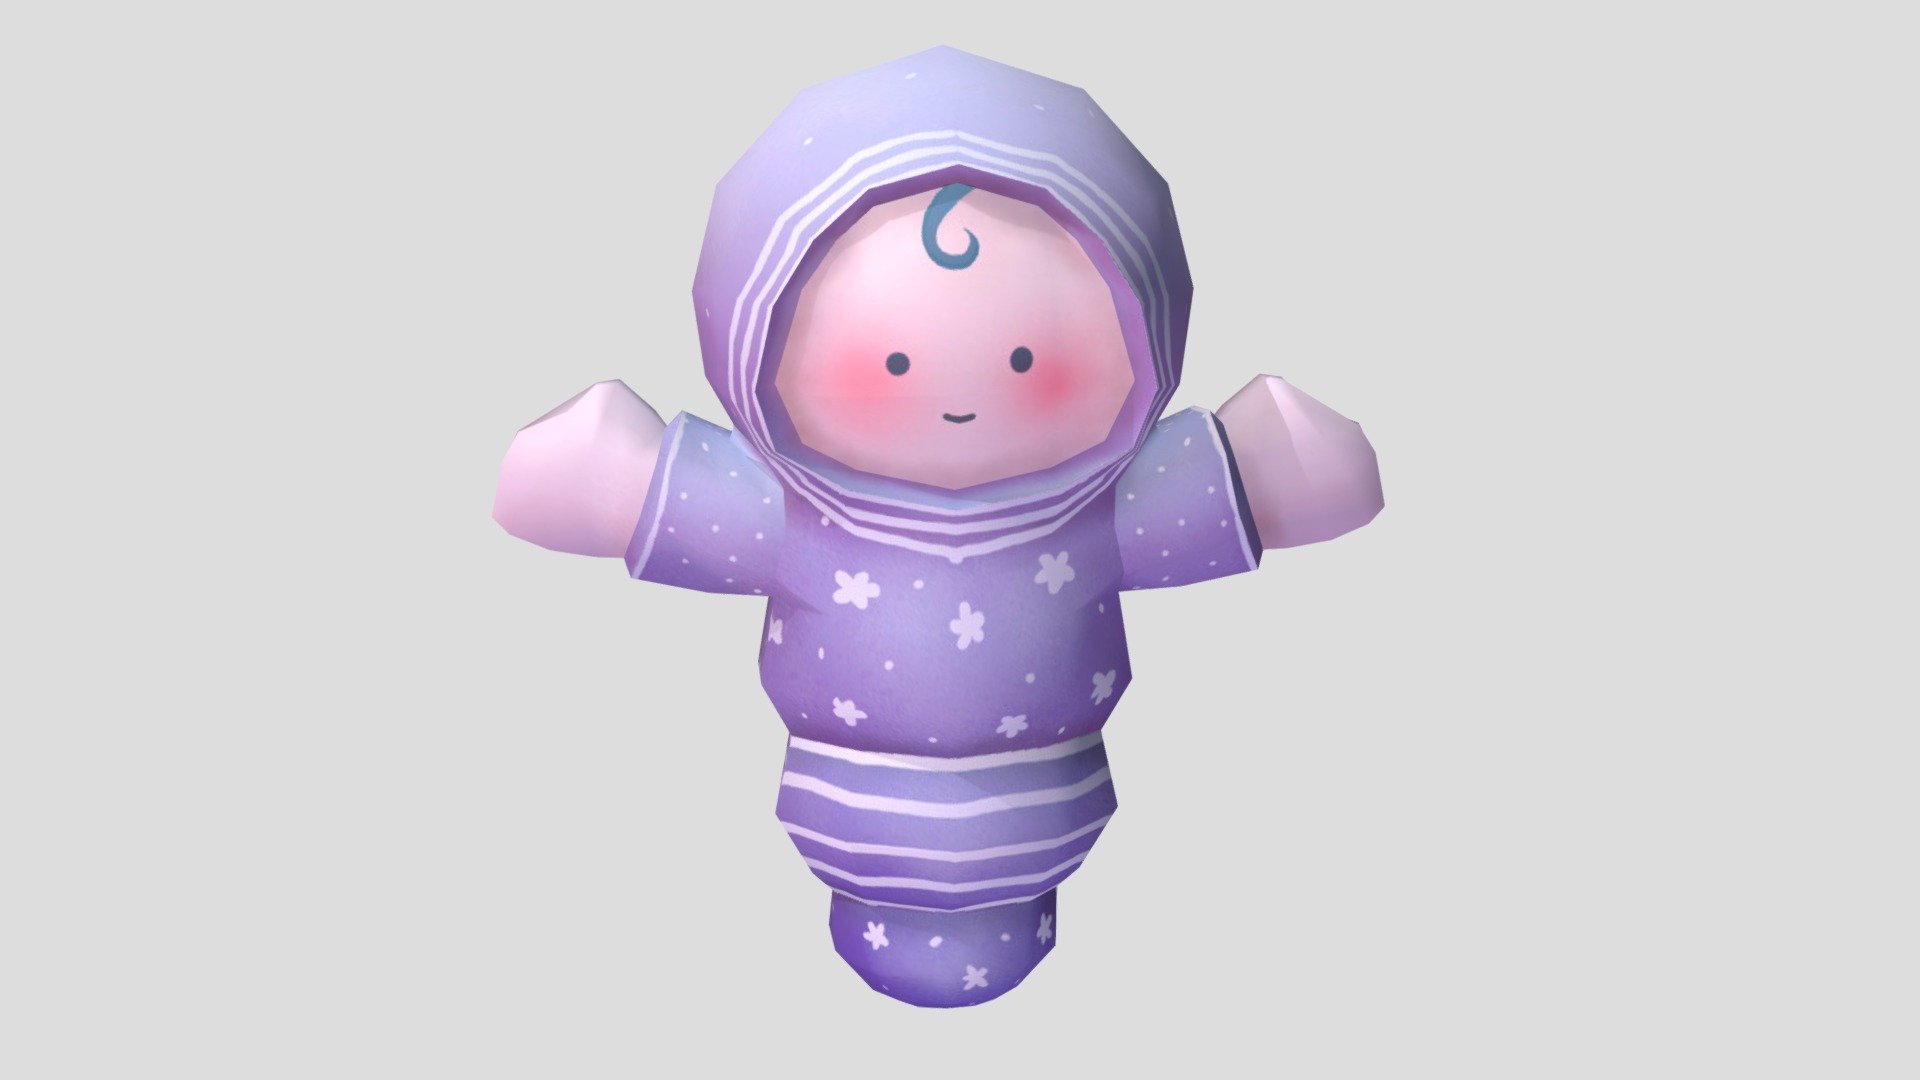 A doll created for my 3d game art production class 3d model